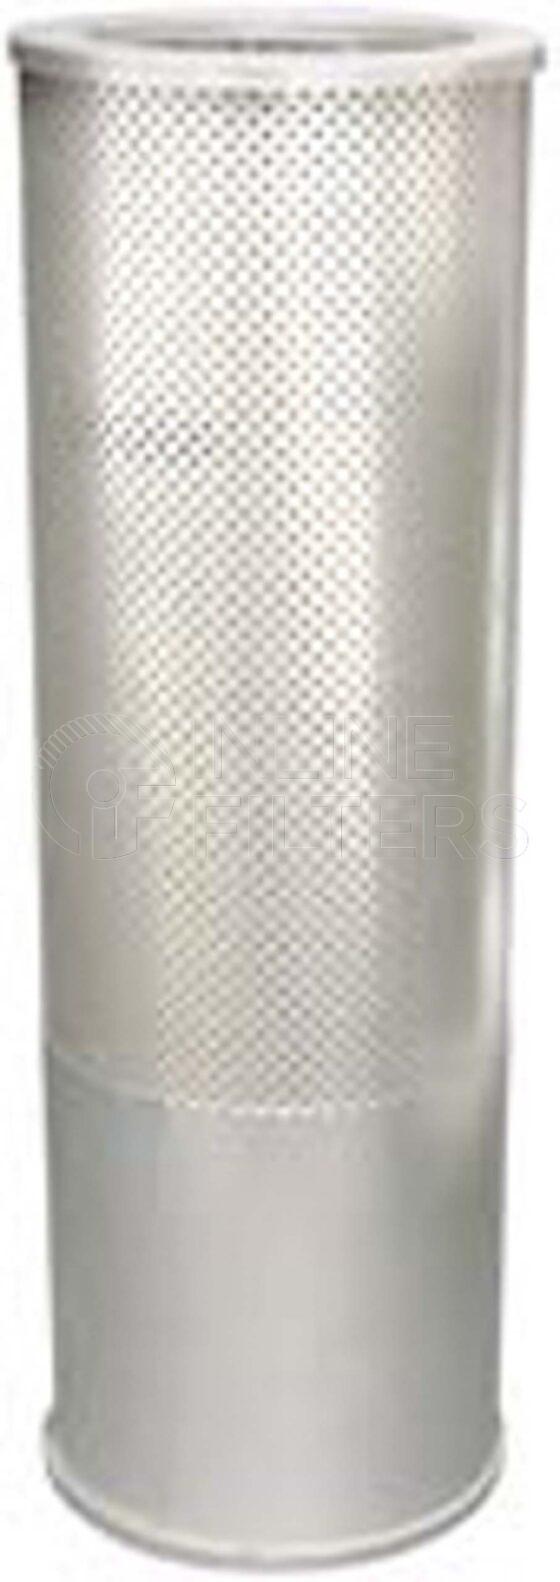 Inline FH50609. Hydraulic Filter Product – Cartridge – Round Product Hydraulic filter product